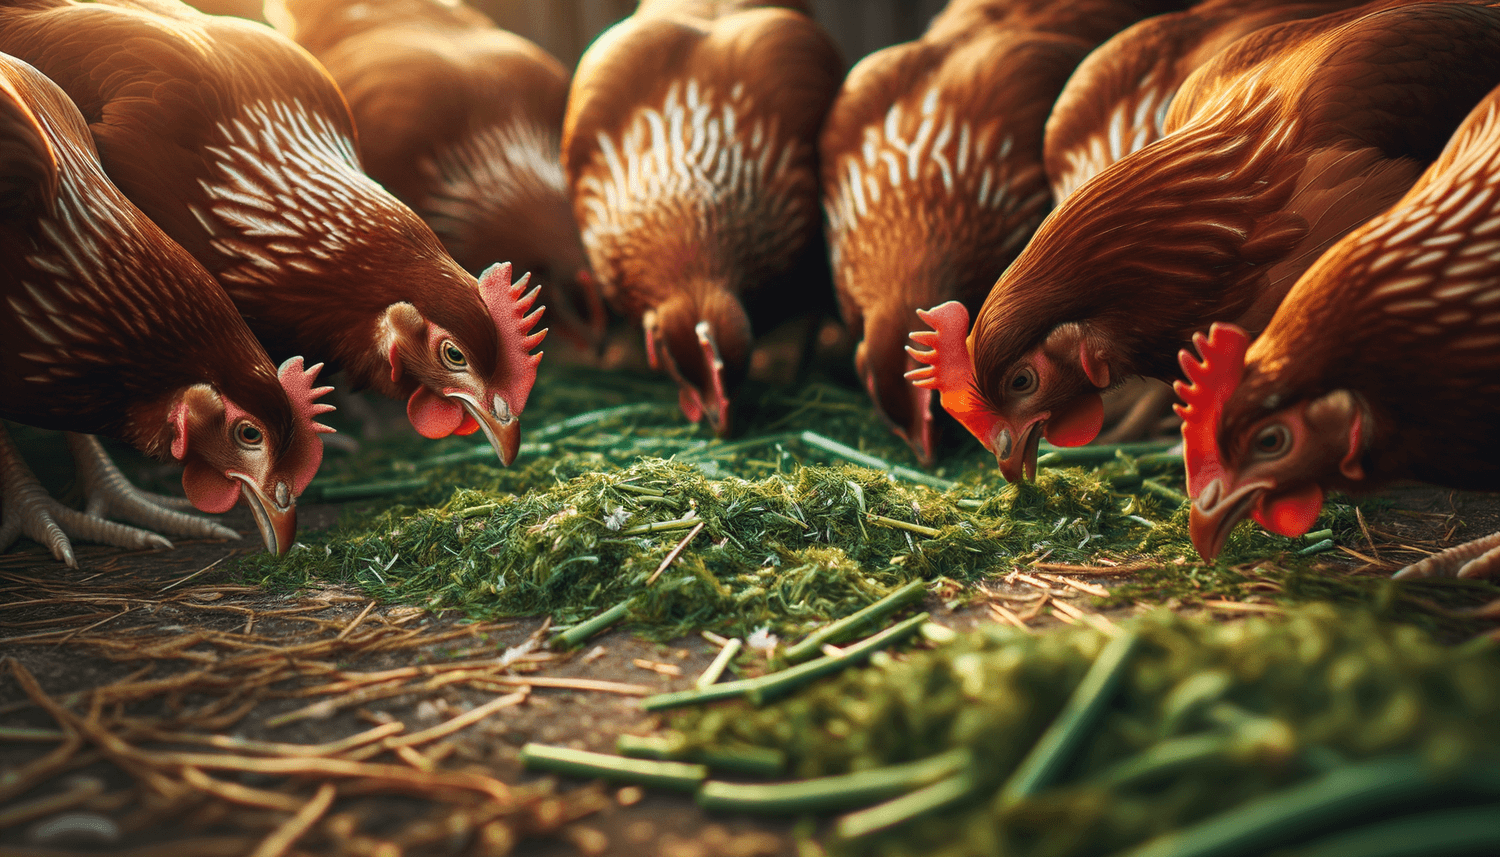 Can Chickens Eat Grass Clippings?